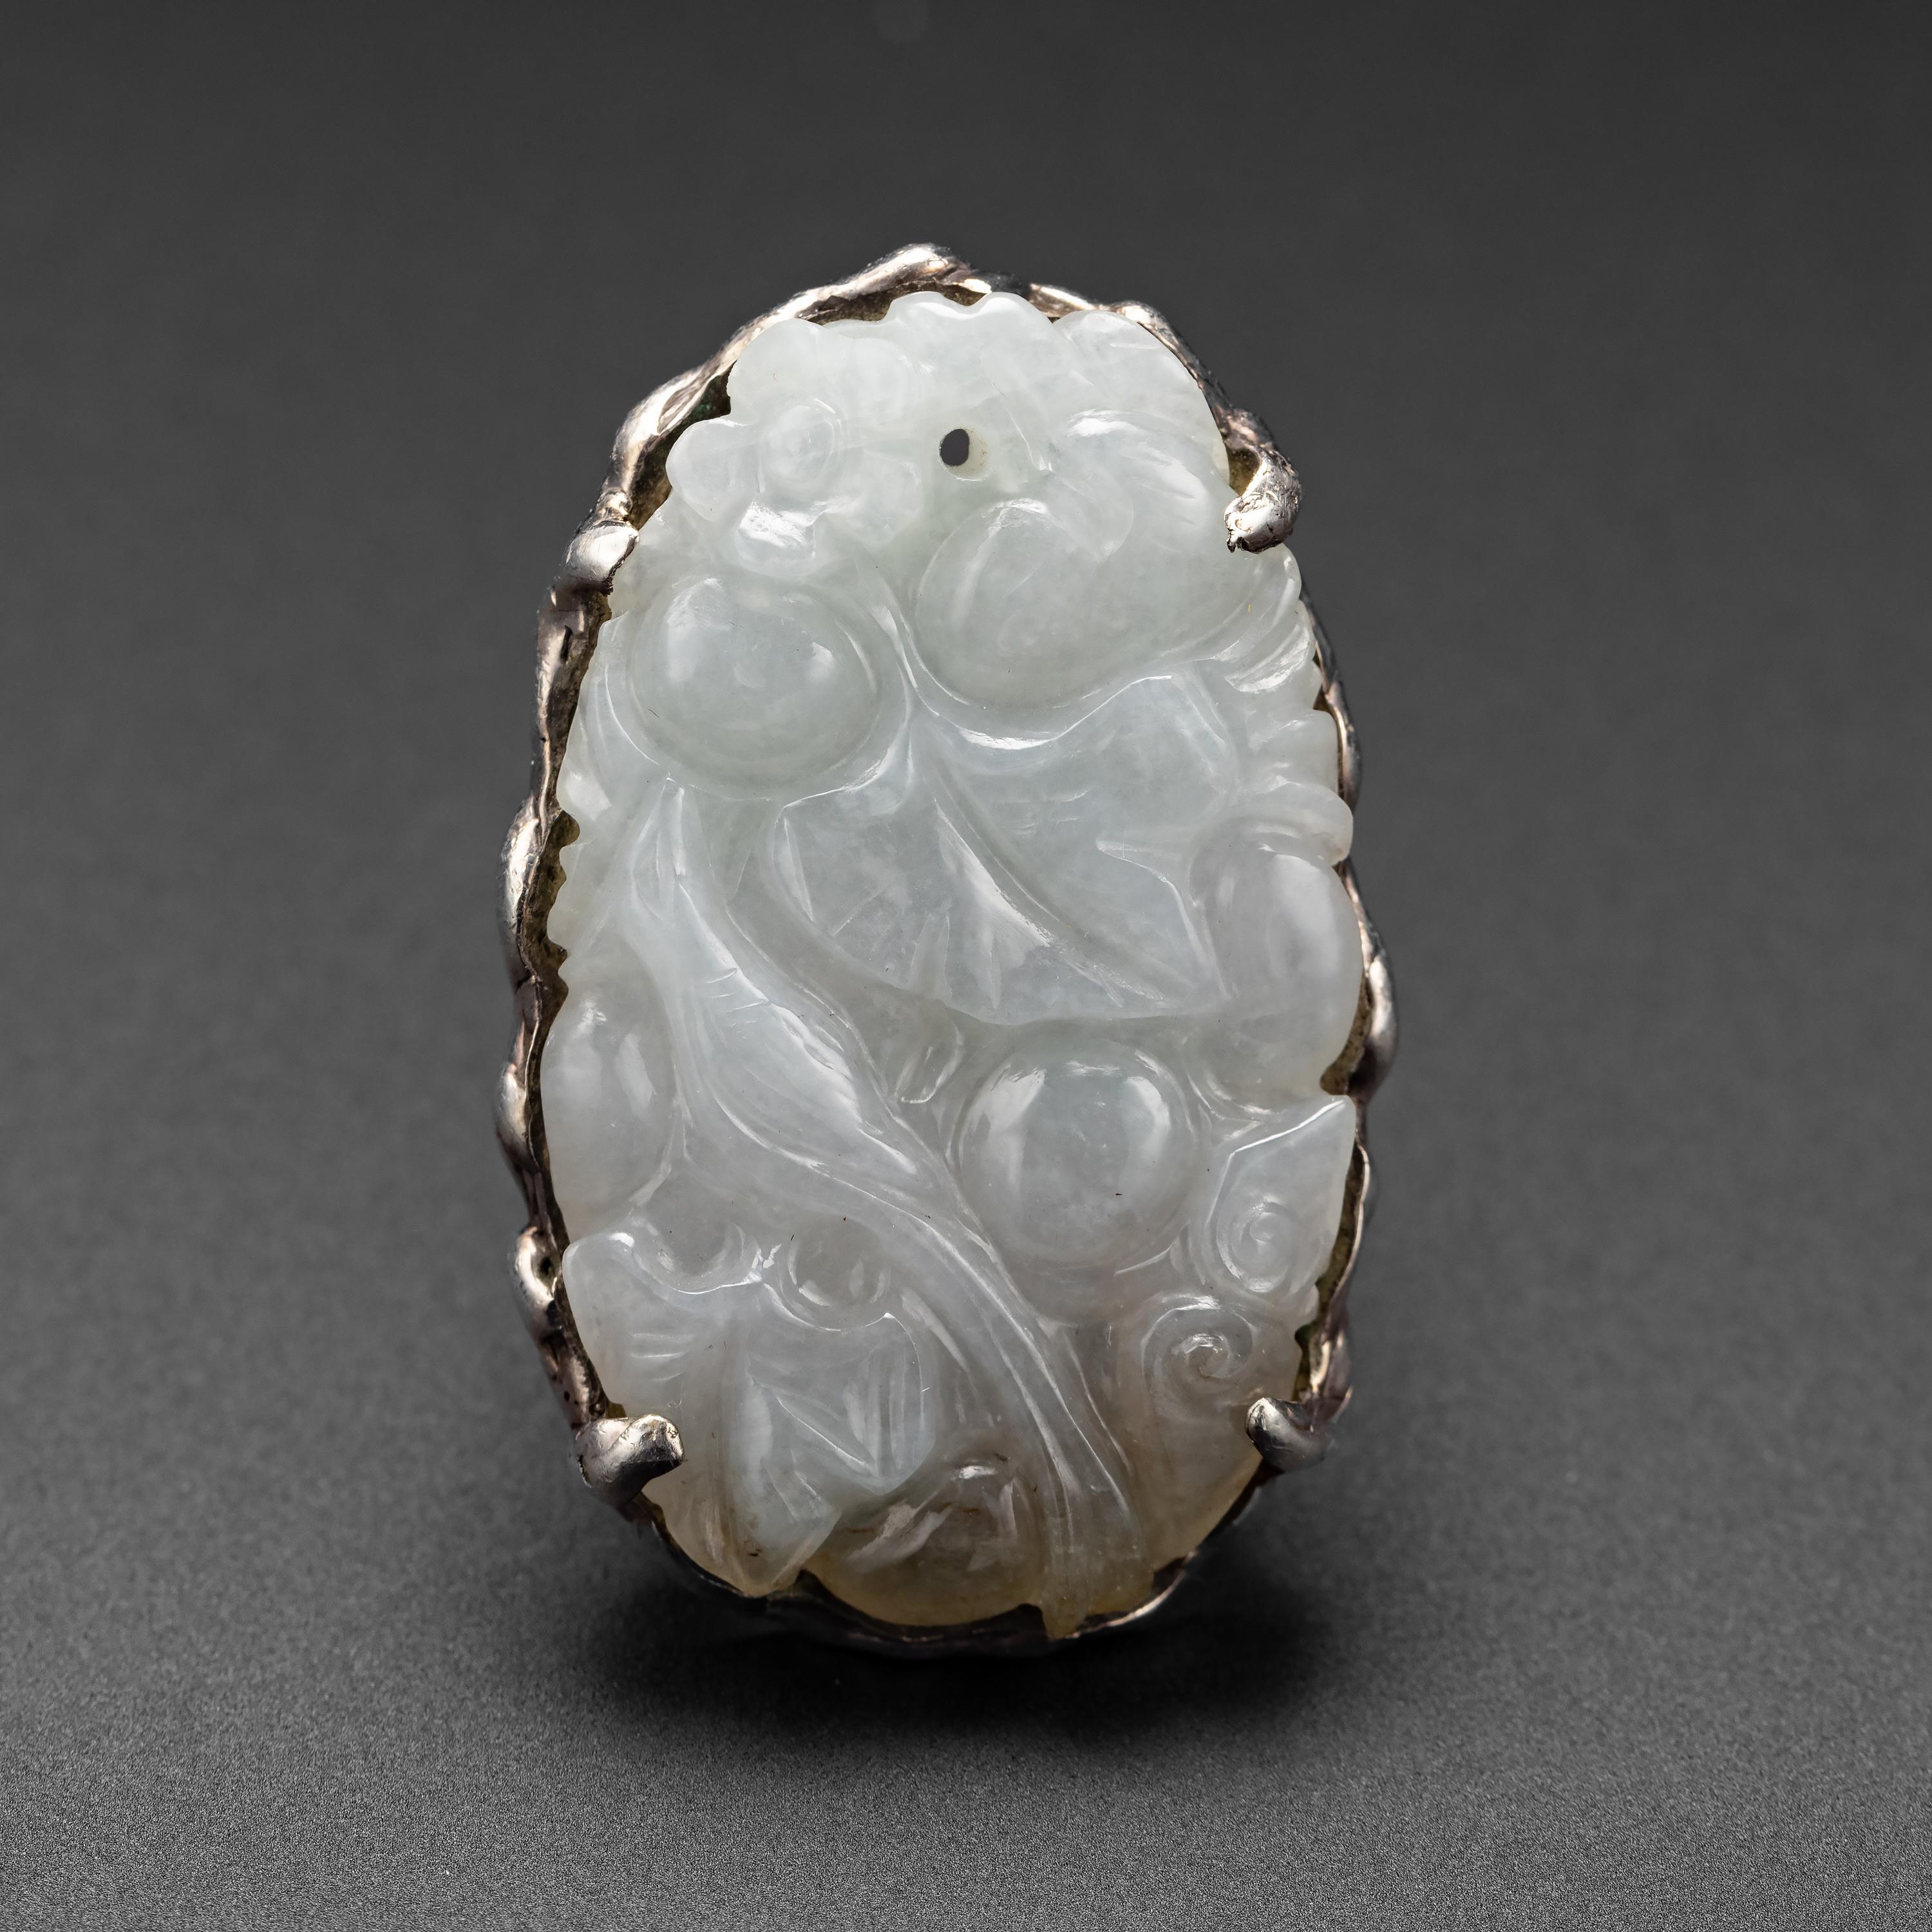 This entirely handmade modernist ring dates from the 1960s and was created to showcase a stunning, translucent, and nearly colorless jade carving. Measuring 40.66mm x 24.71mm, the carving is quite impressive. It was skillfully carved to depict a